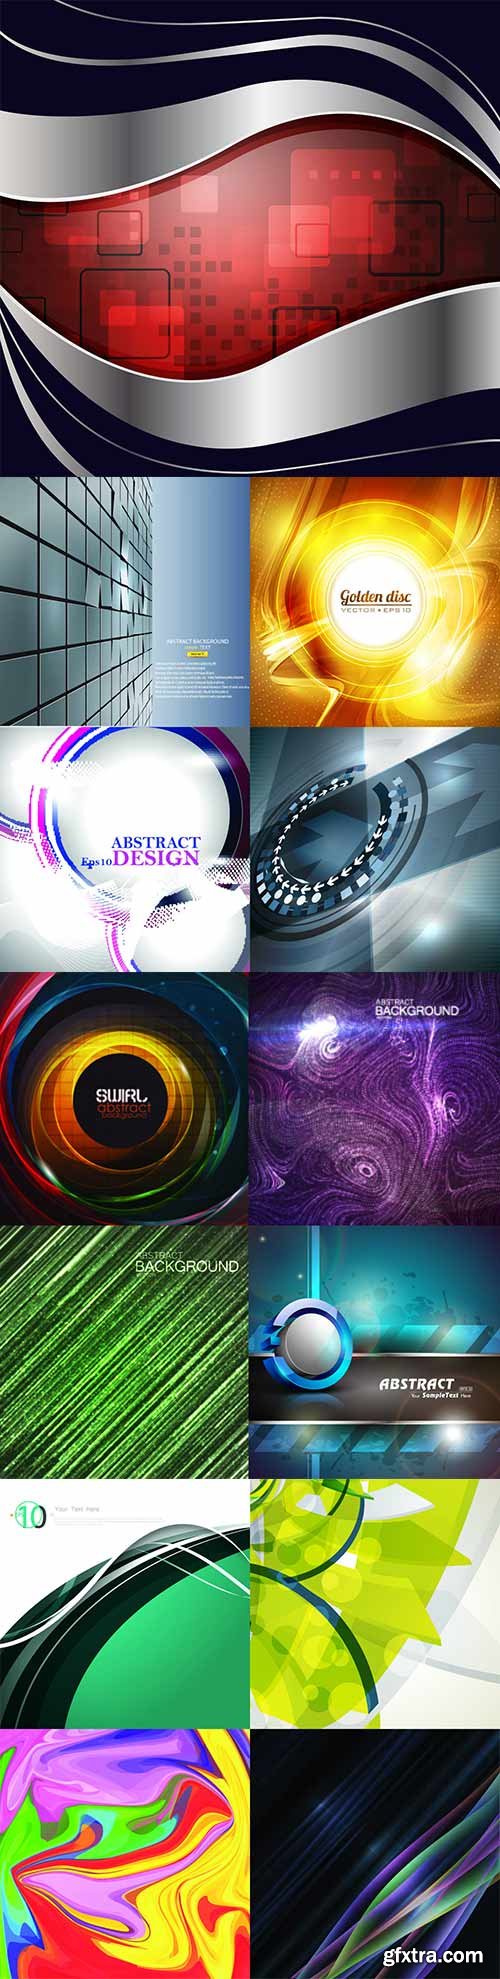 Bright colorful abstract backgrounds vector - 61